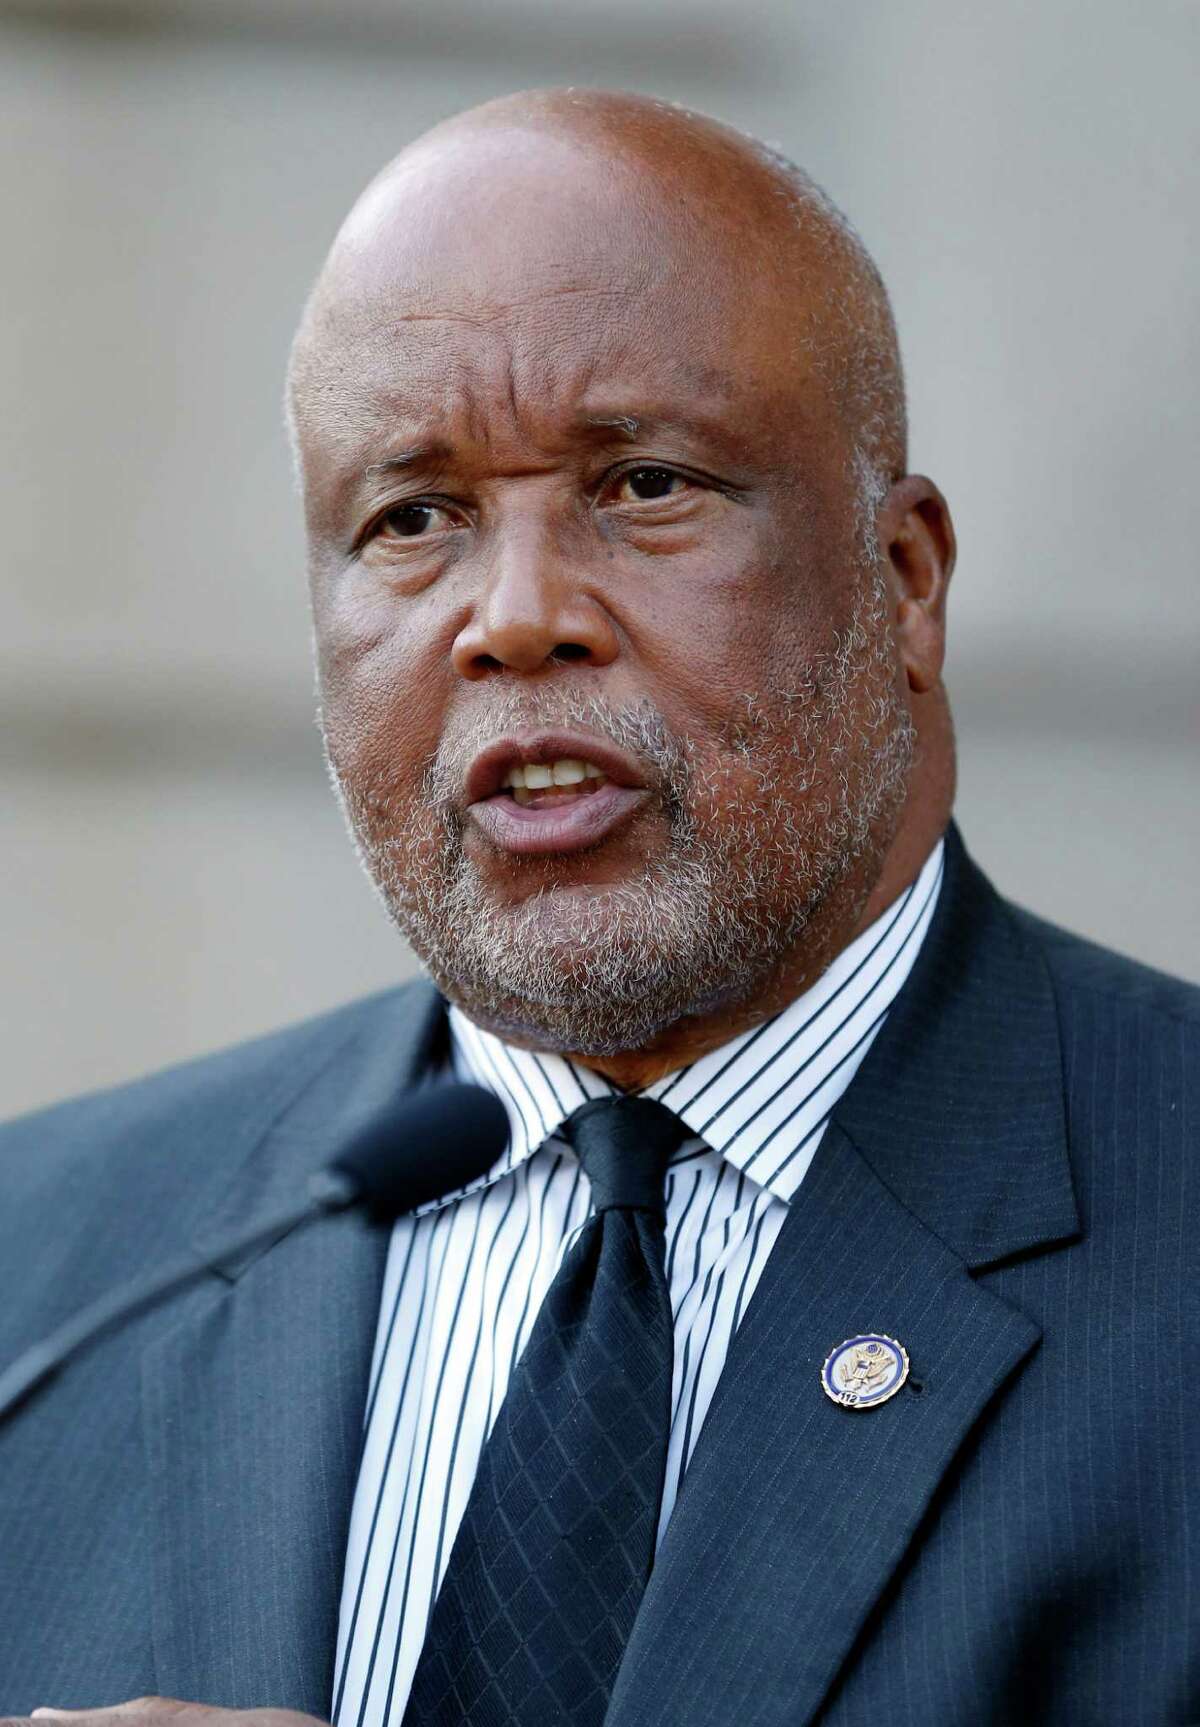 FILE - This is a Oct. 30, 2014, file photo shows Rep. Bennie Thompson, D- Miss., as he speaks in Jackson, Miss. Several members of the Congressional Black Caucus, including Thompson, are urging the Obama administration to withhold federal recognition of the Pamunkey tribe in southeast Virginia because of its history of banning intermarriage with blacks. (AP Photo/Rogelio V. Solis, File)